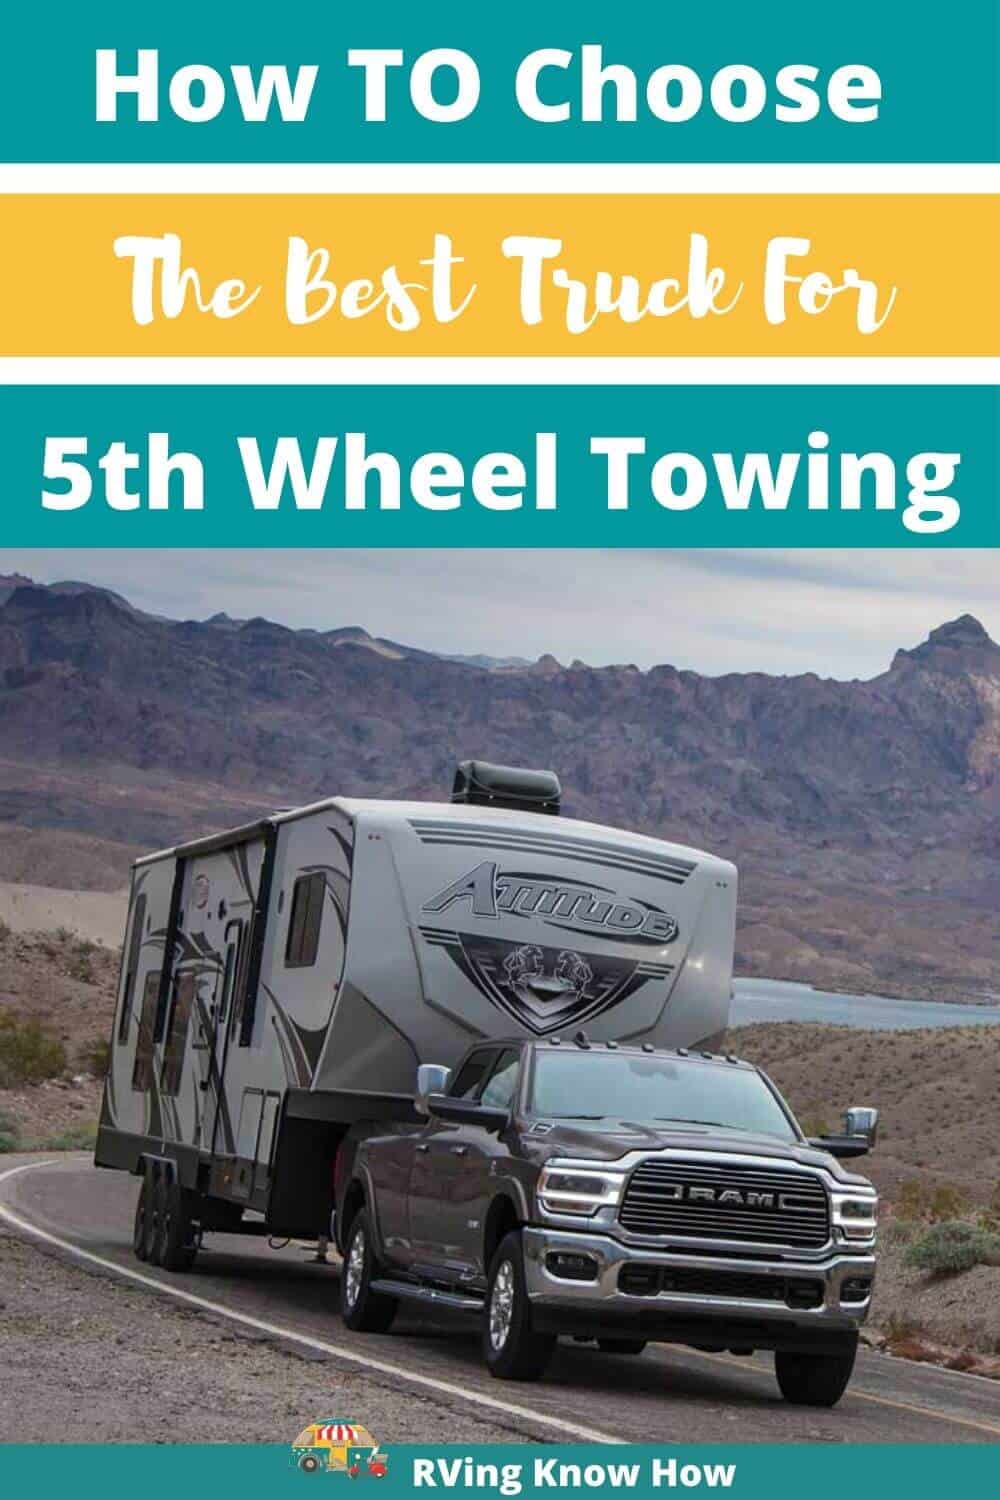 How To Choose The Best Truck For Towing A 5th Wheel_